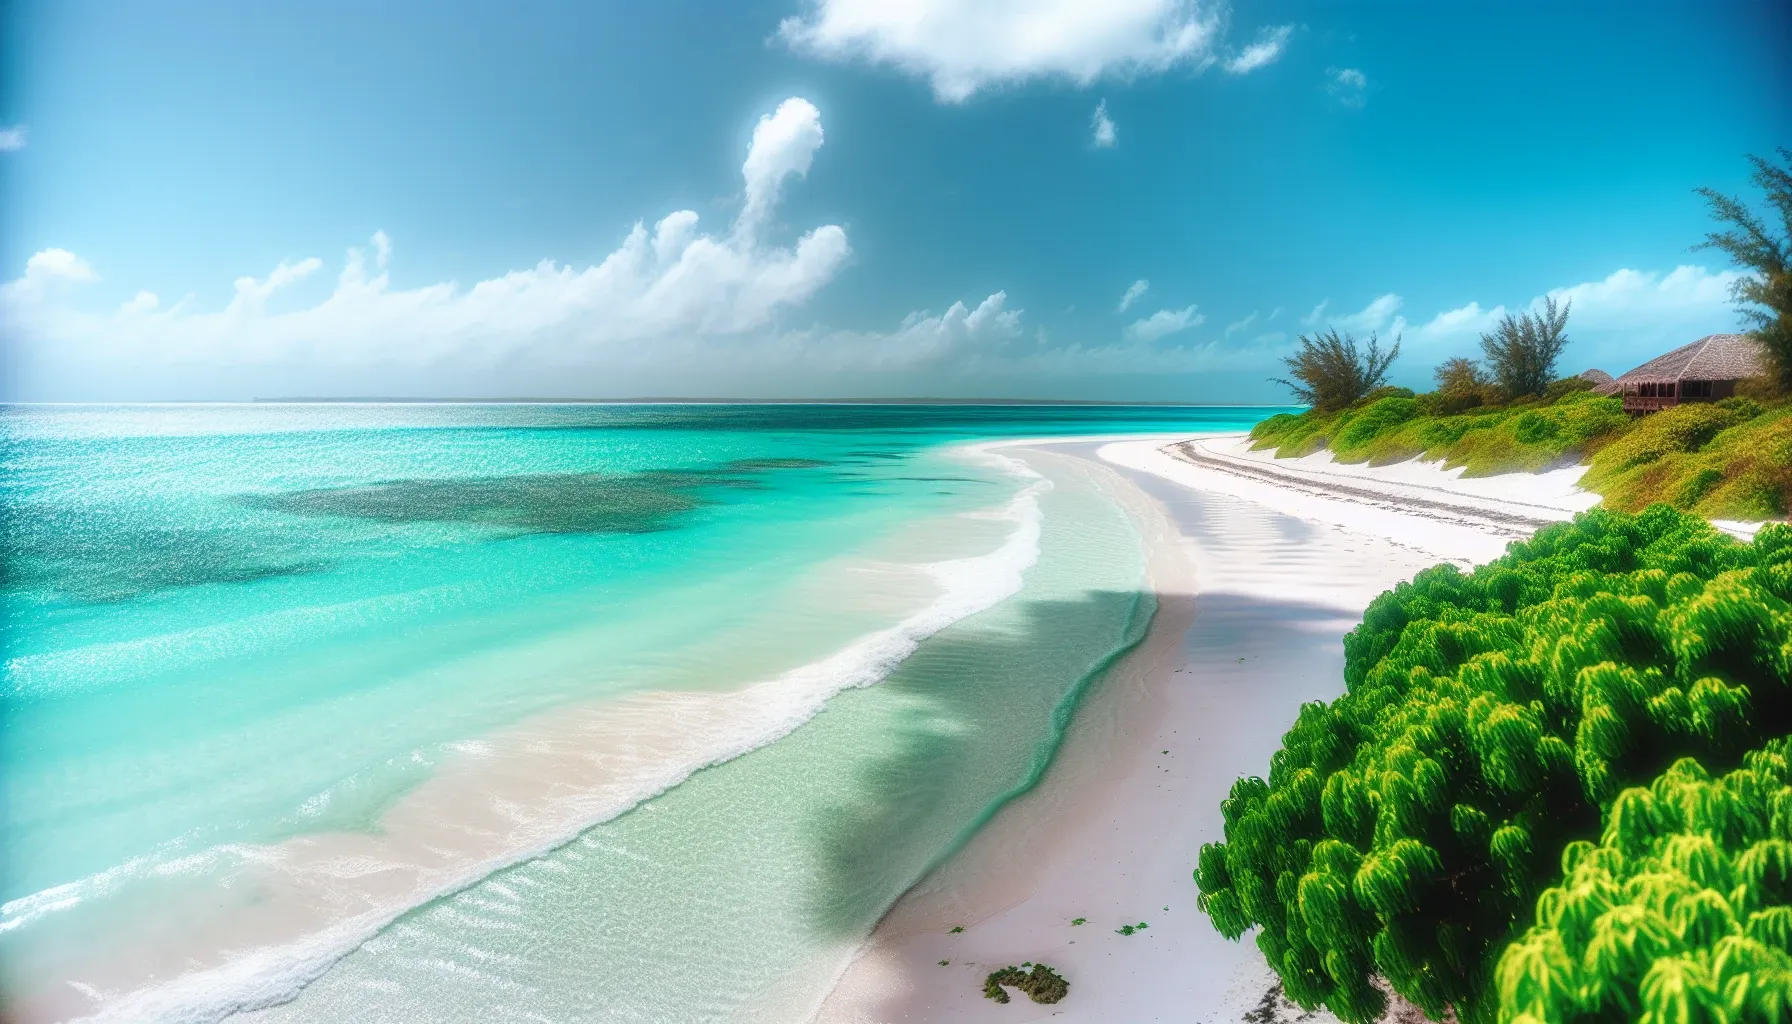 Zanzibar with crystal-clear turquoise waters and pristine white sand.